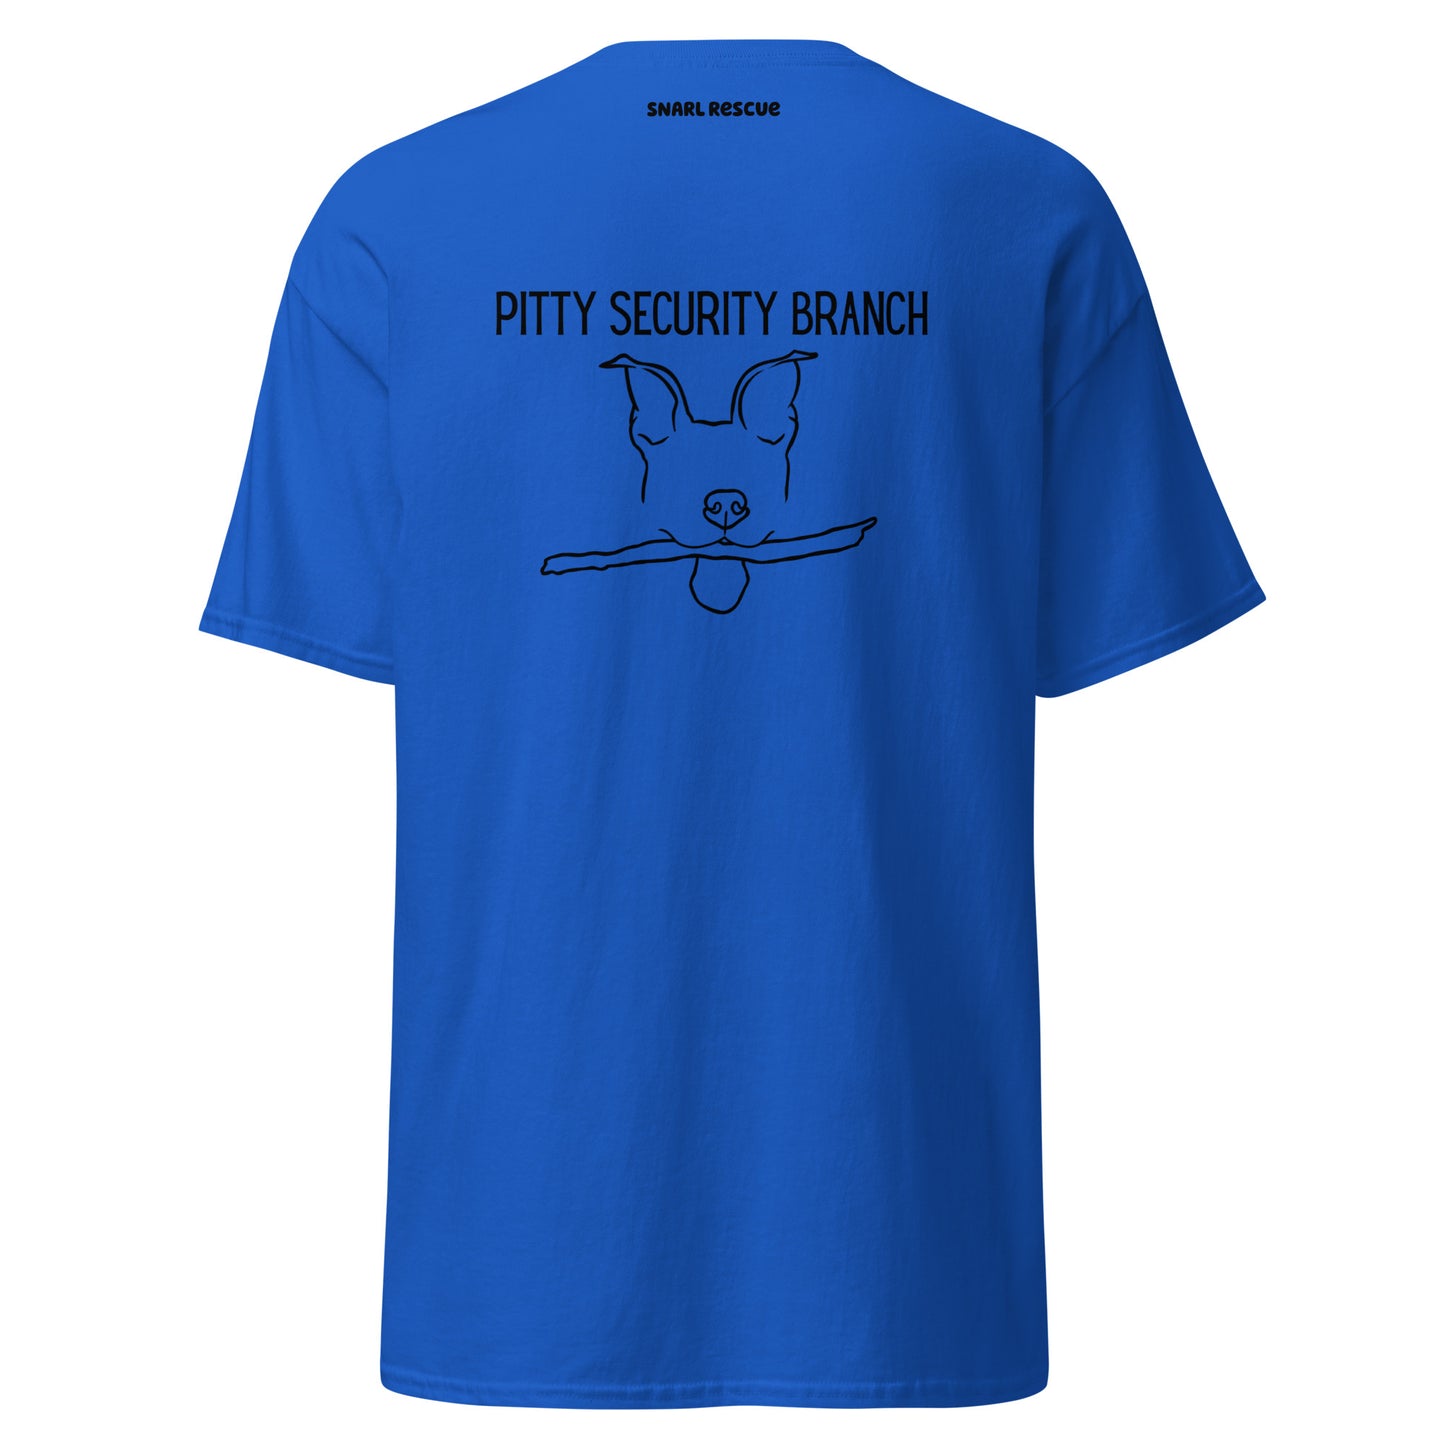 The Pitty Security Branch Tee